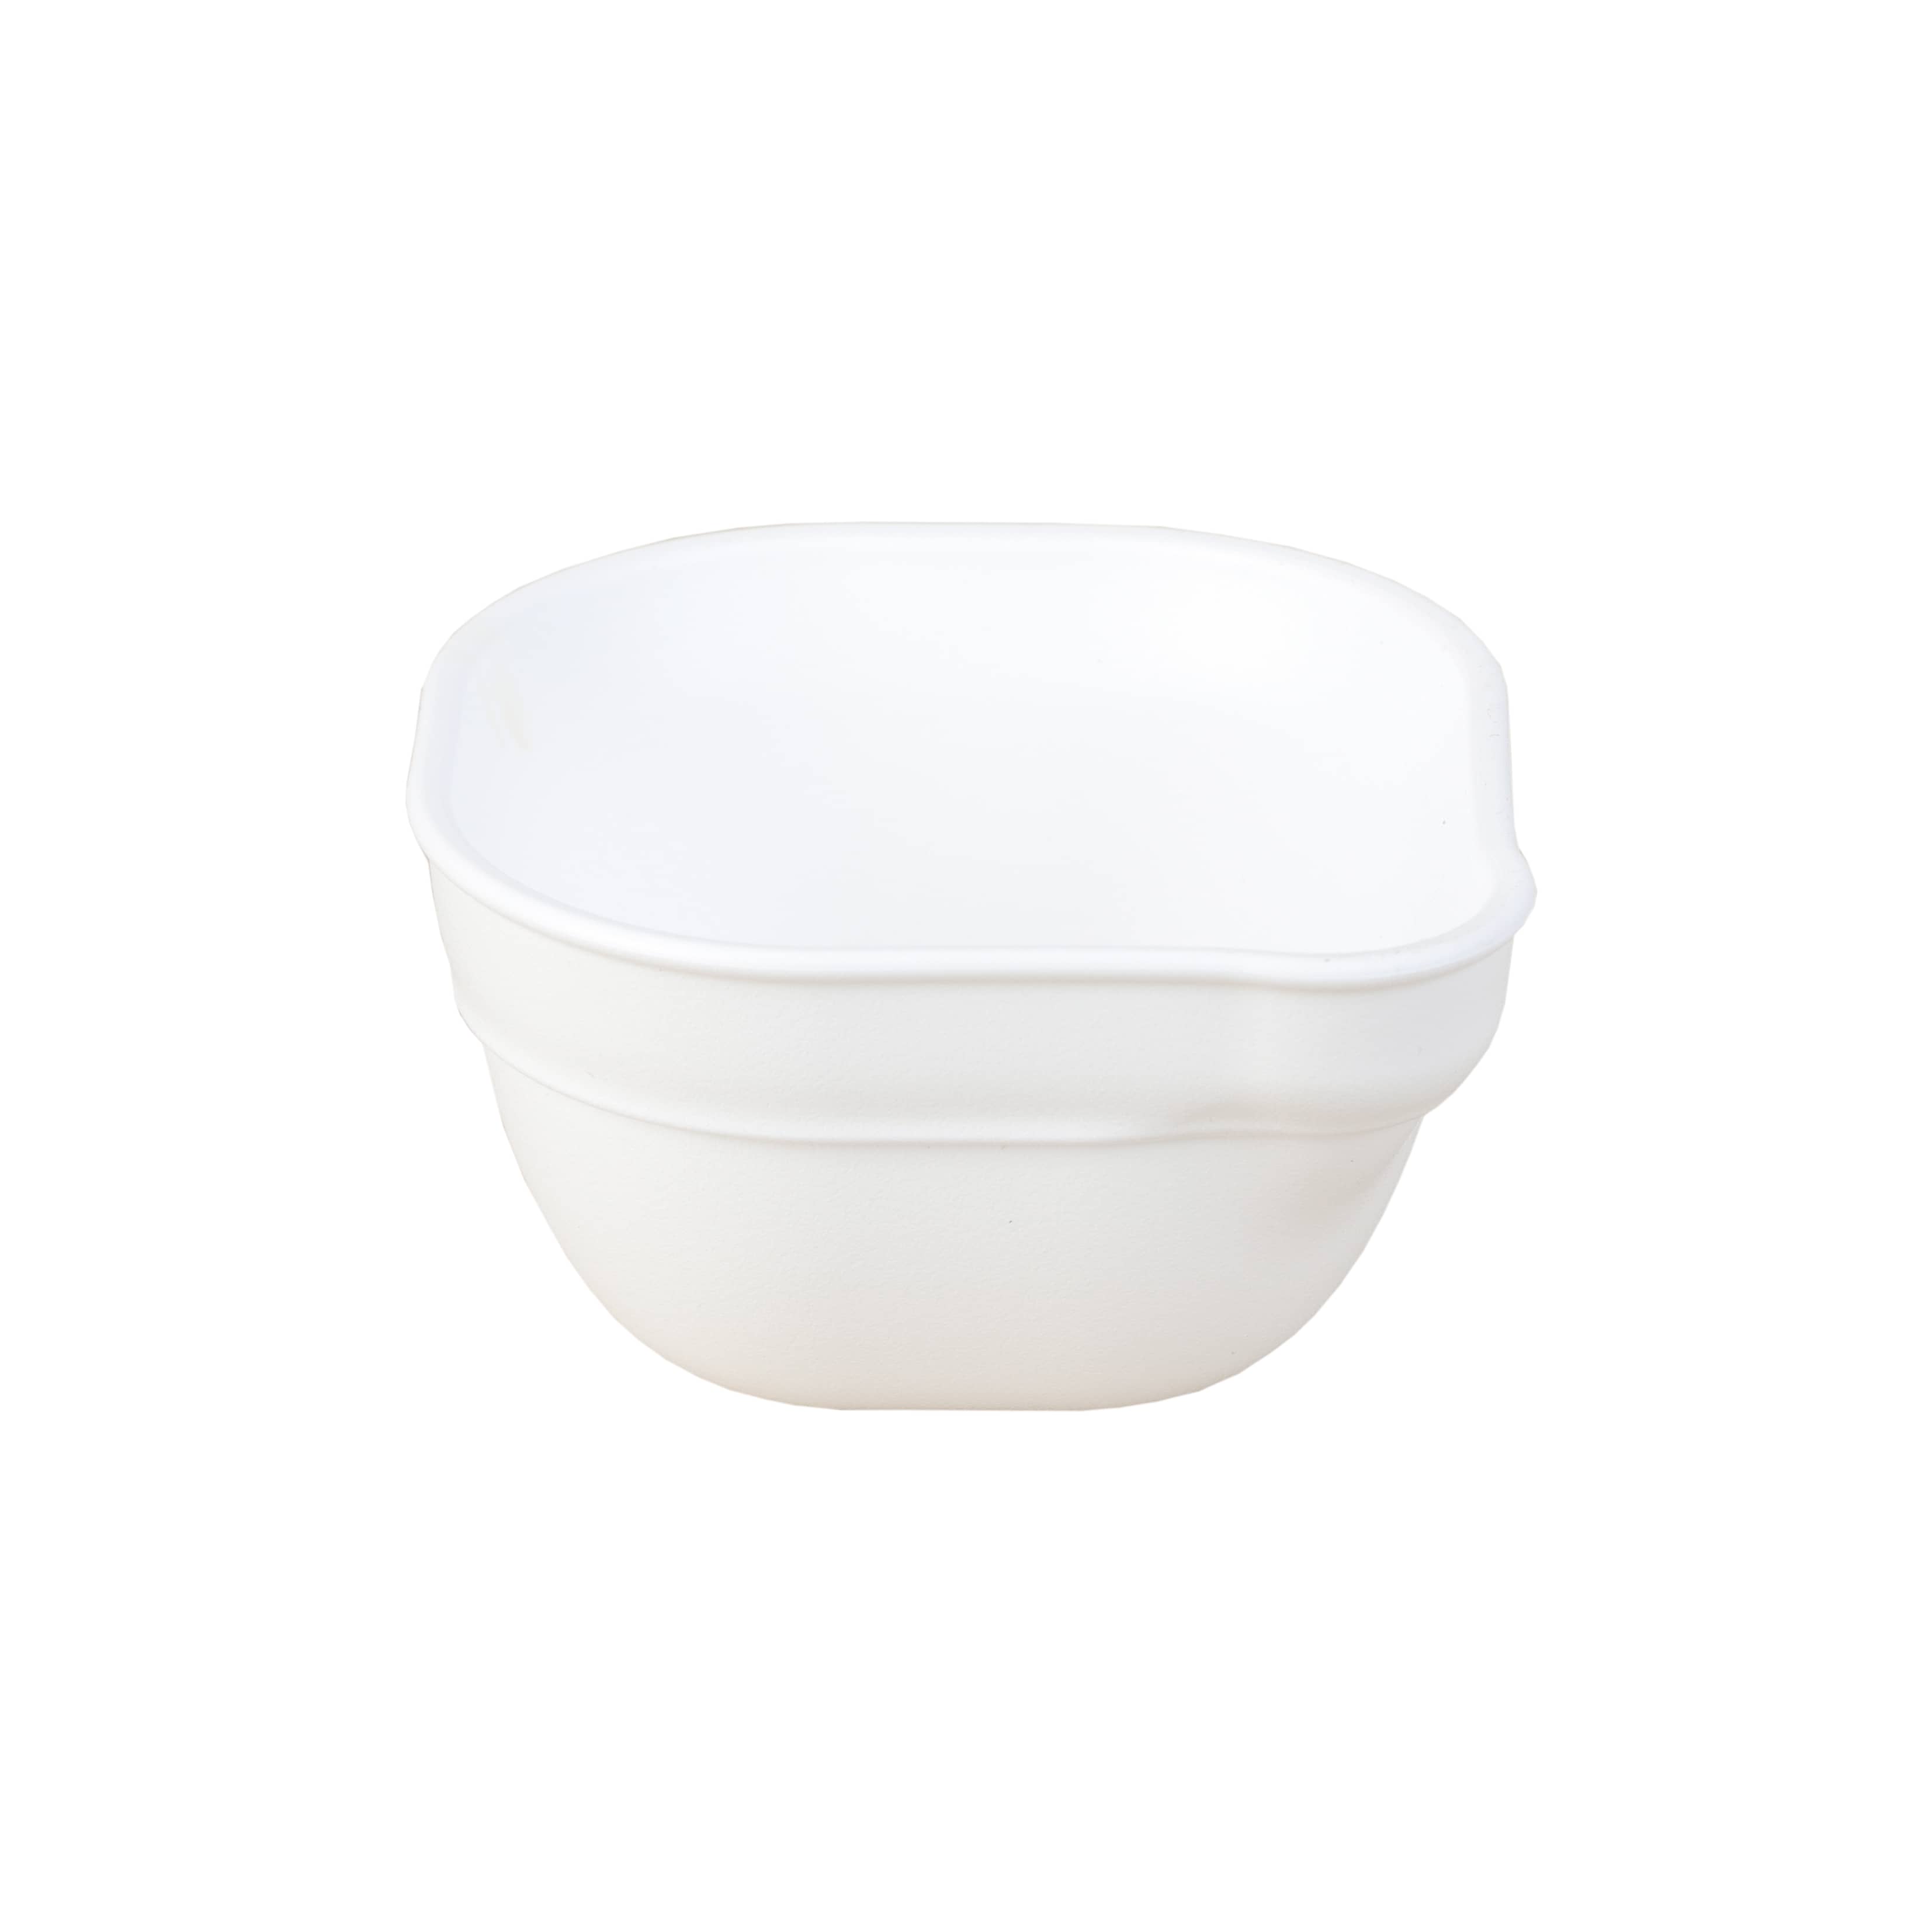 Re-Play Recycled Dip 'n' Pour Bowl - White